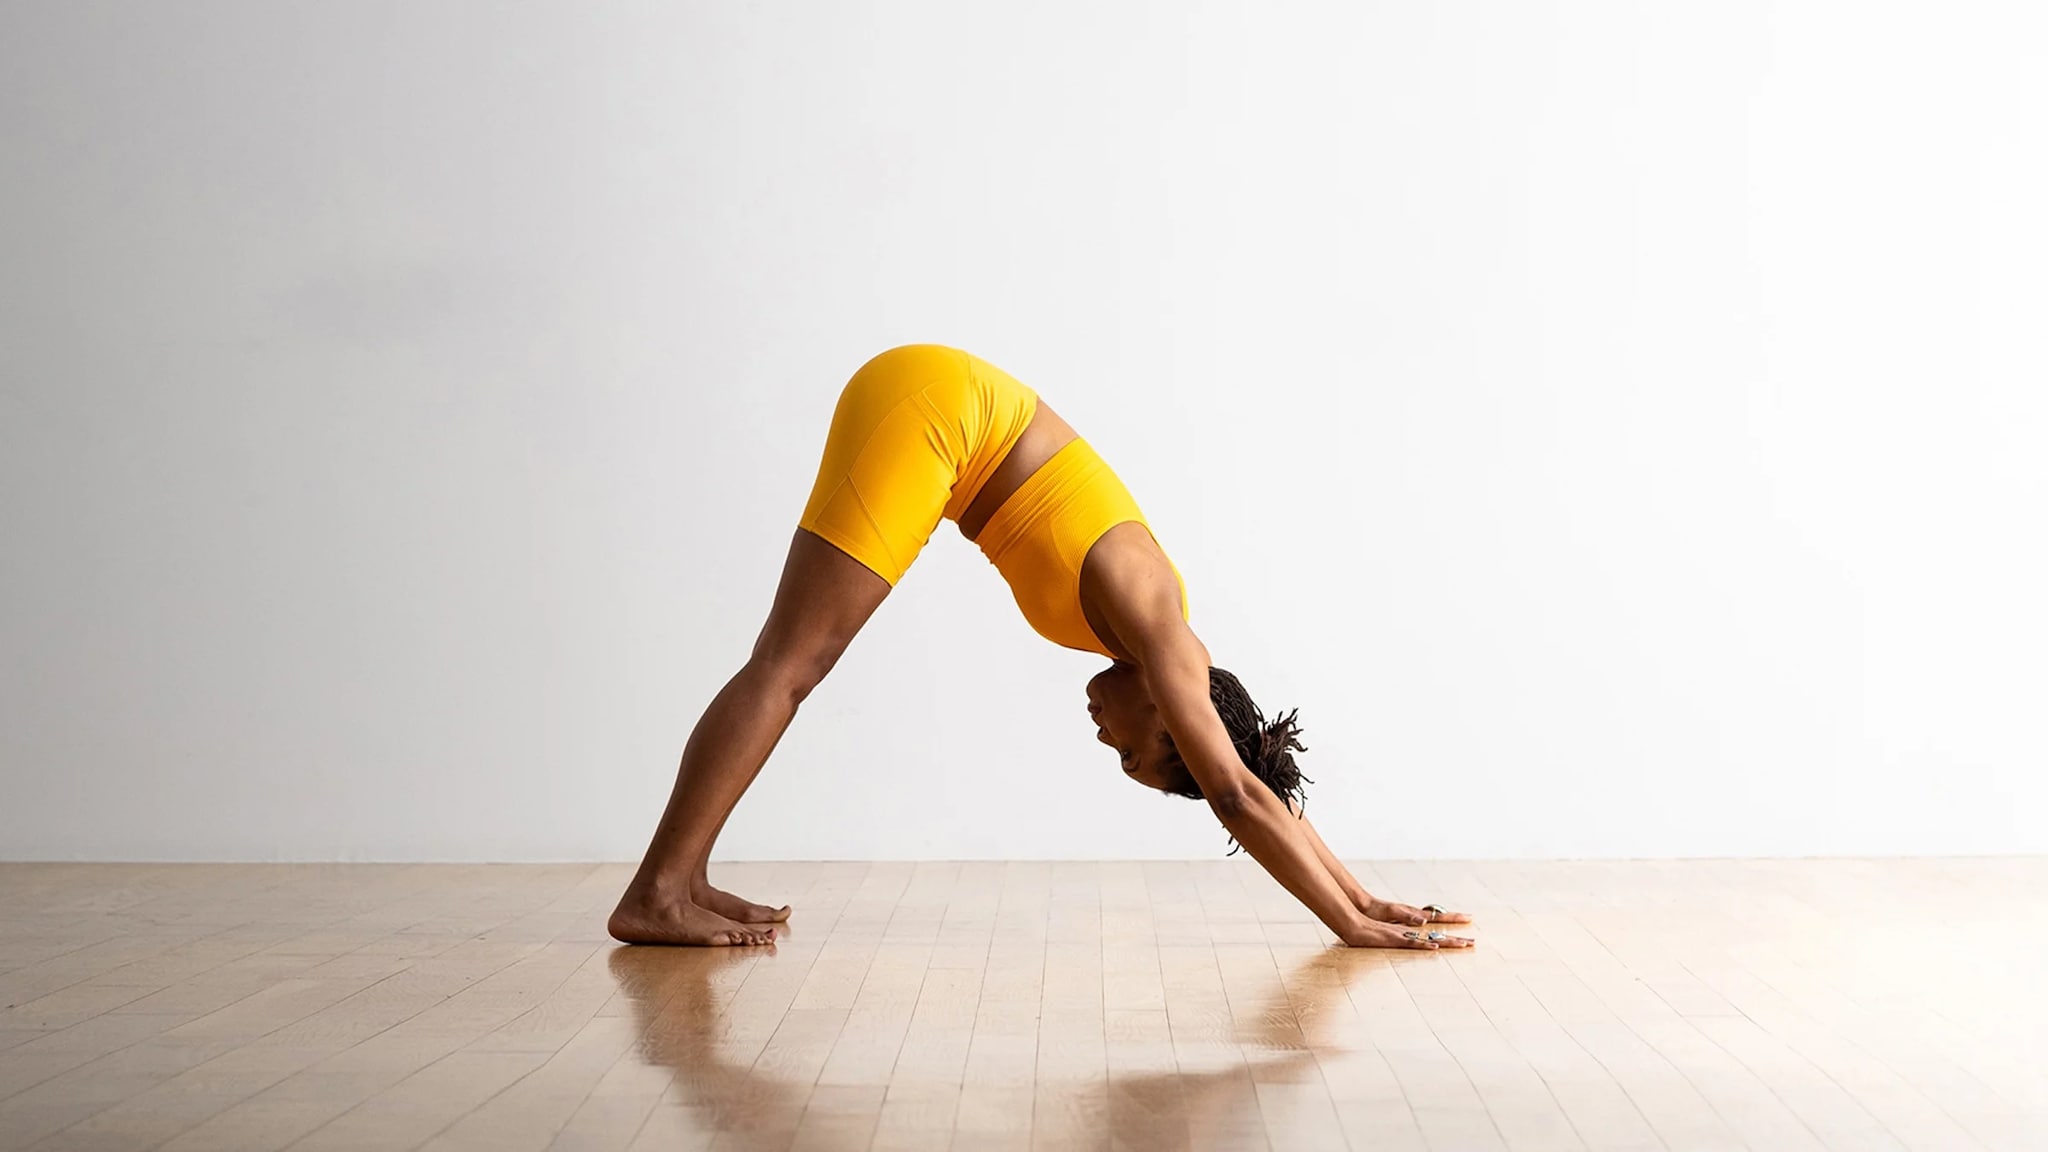 15 Alternatives for Your Usual Inversions - Yoga Journal